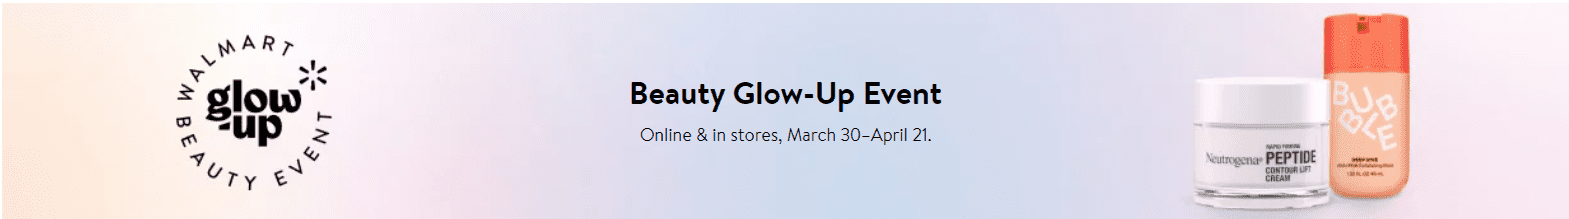 Beauty-Glow-Up-Event-